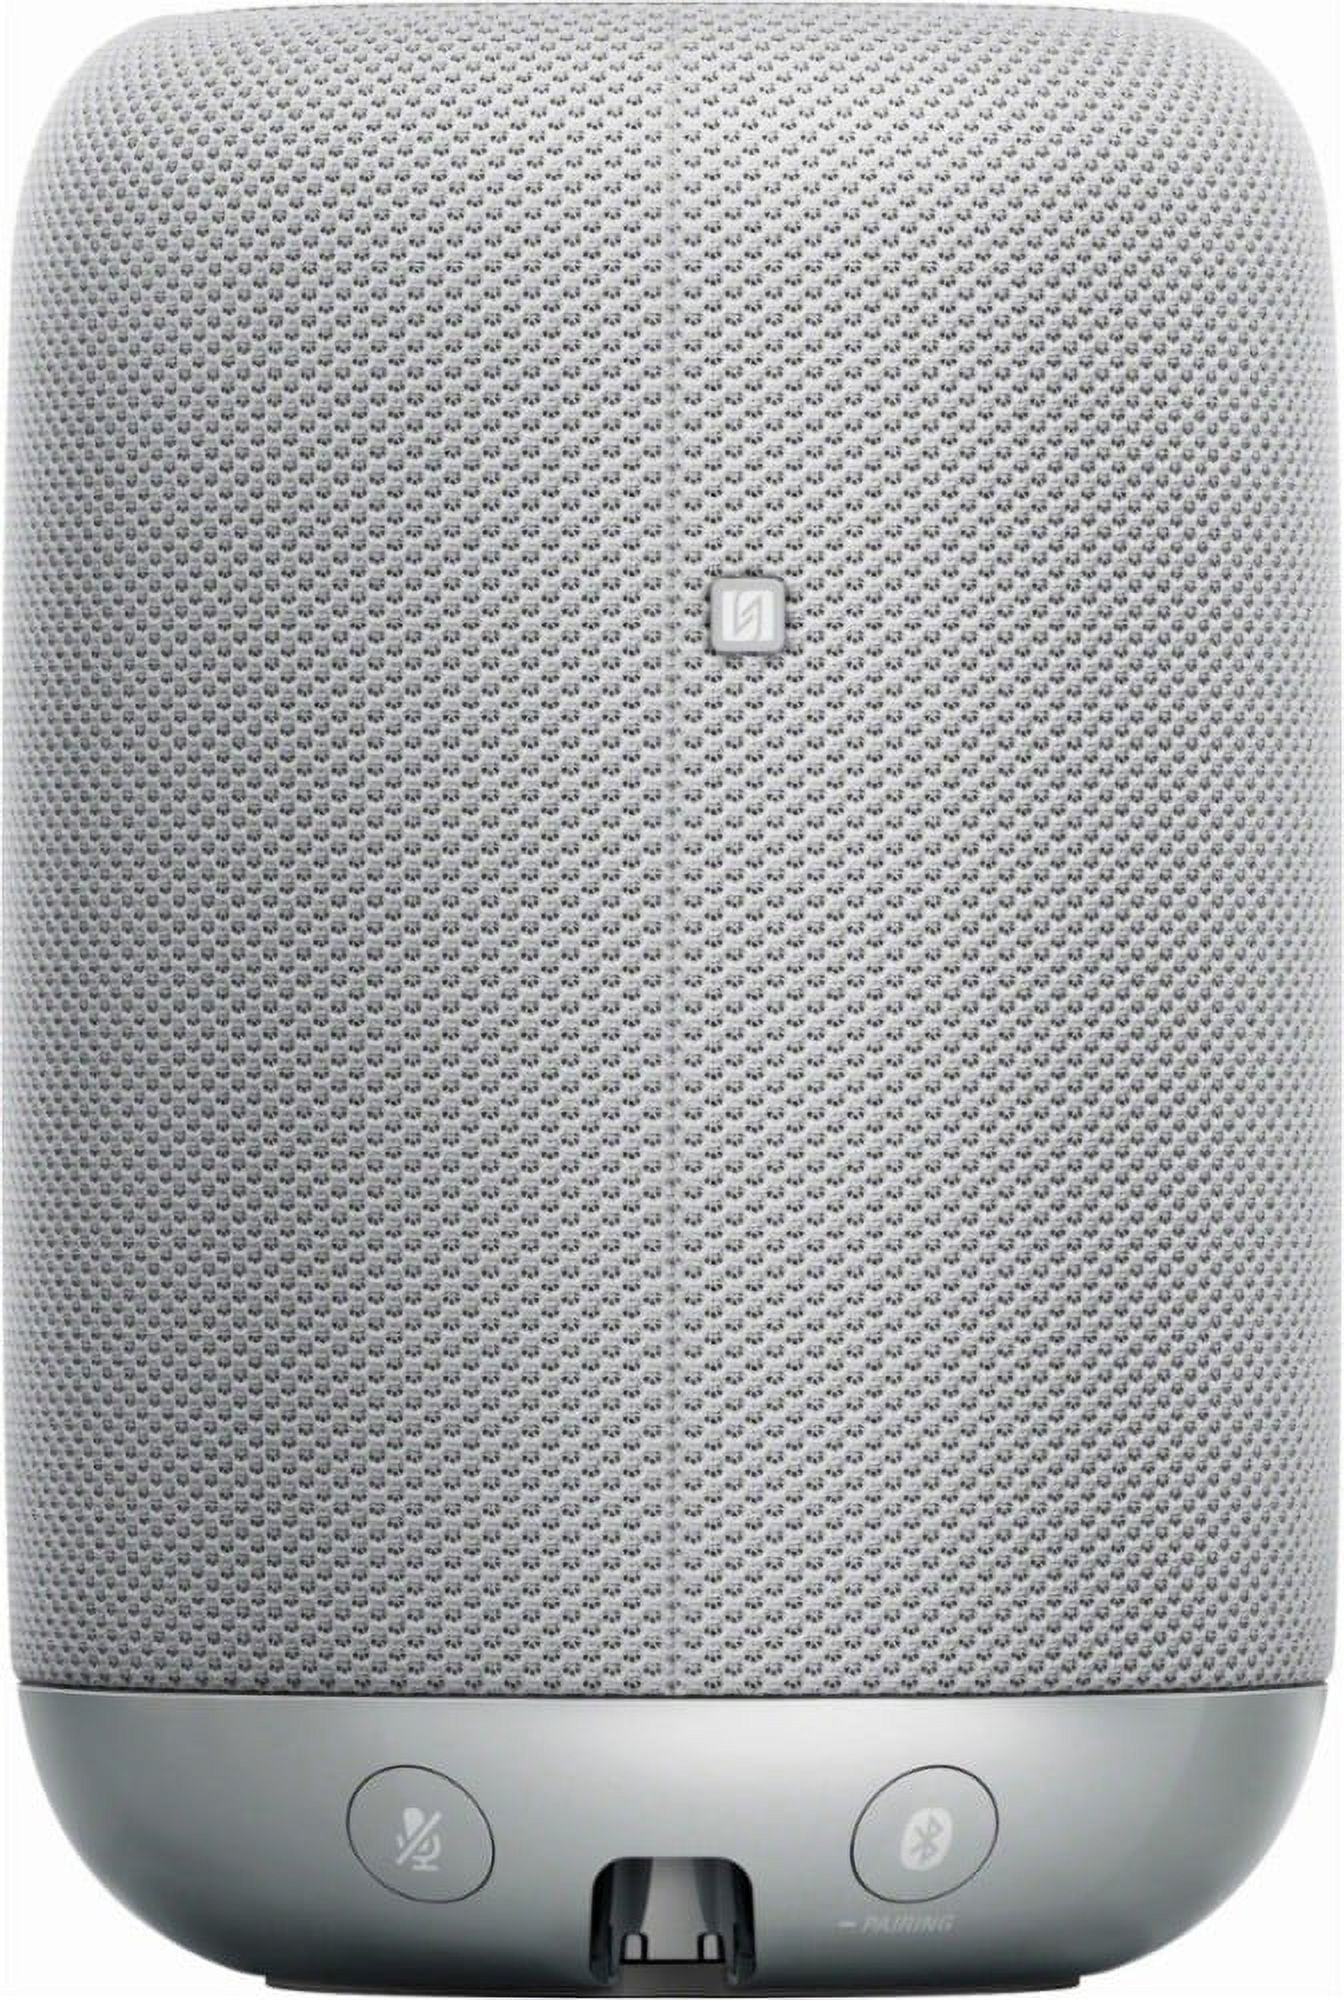 Sony Smart Speaker LFS50G with Google Assistant Built In- White - image 4 of 10